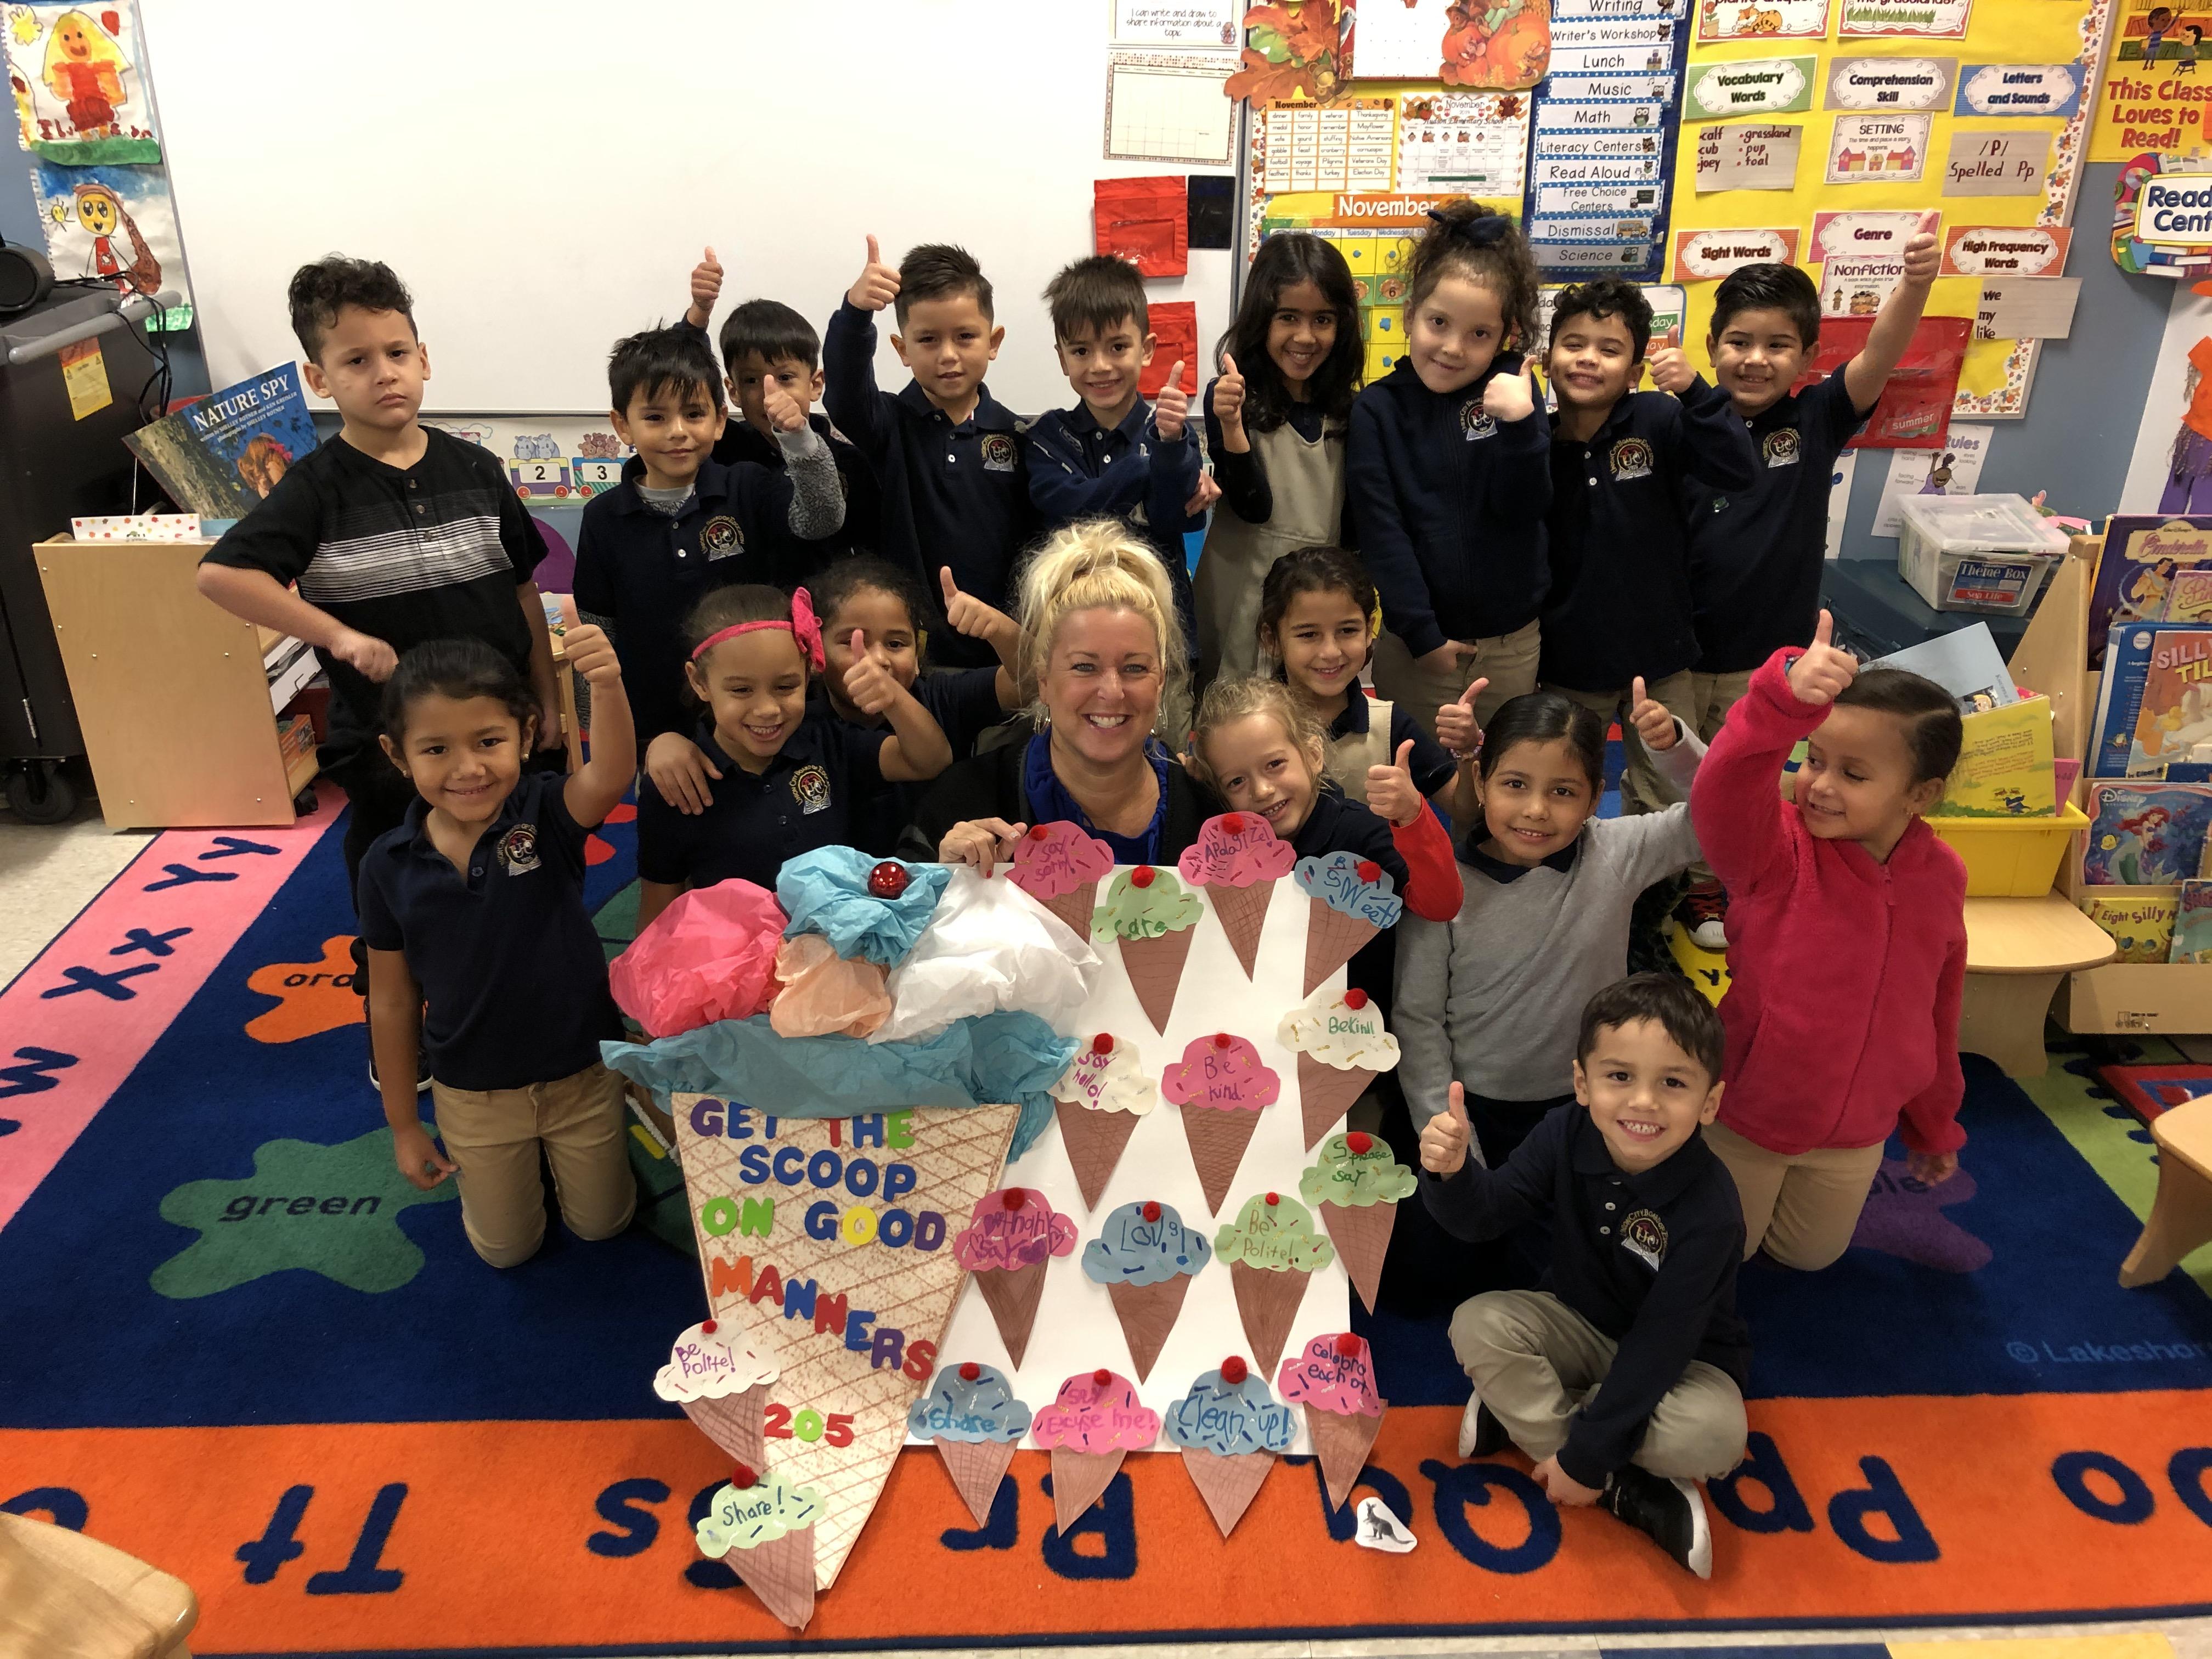 Ms. Hennesy's class holding a large student created ice cream cone with scoops of how students show respect with thumbs up